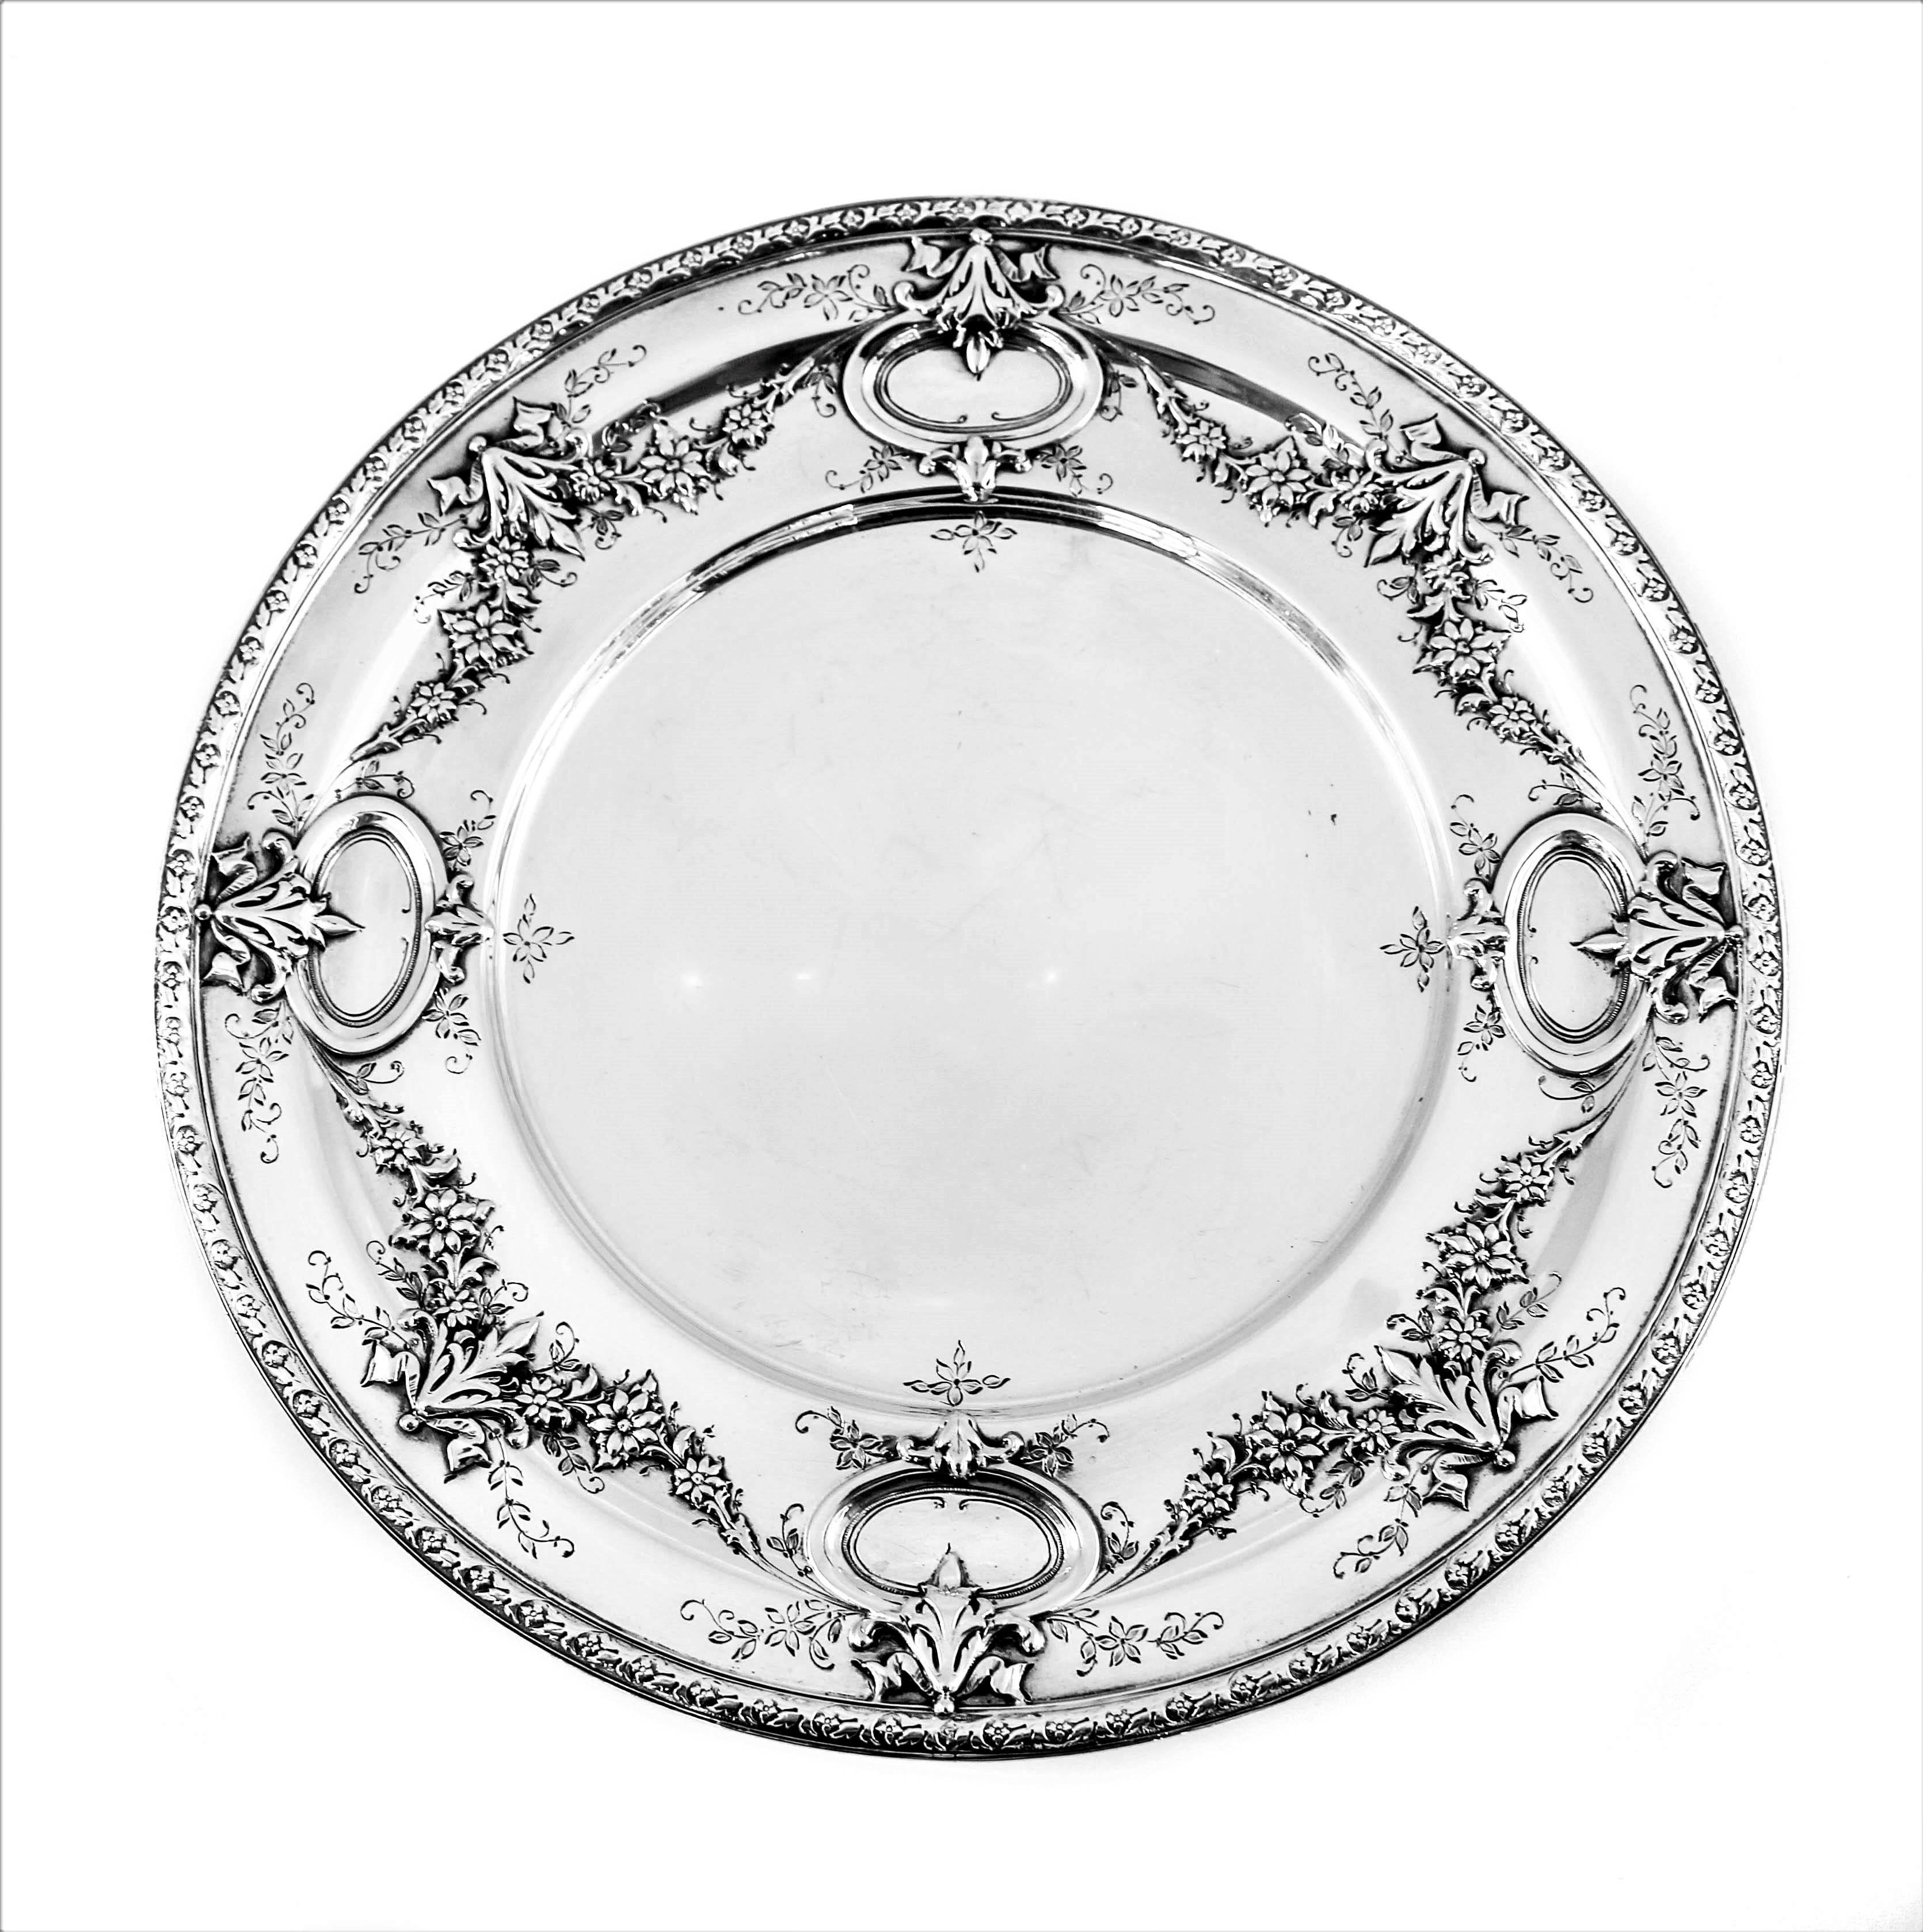 These sterling compotes are simply gorgeous! Old-world charm and detail at its finest. The top surface is flat which is ideal for cookies or pastries. Around the edge raised wreaths and a medallion pattern decorate them. The bases have an etched